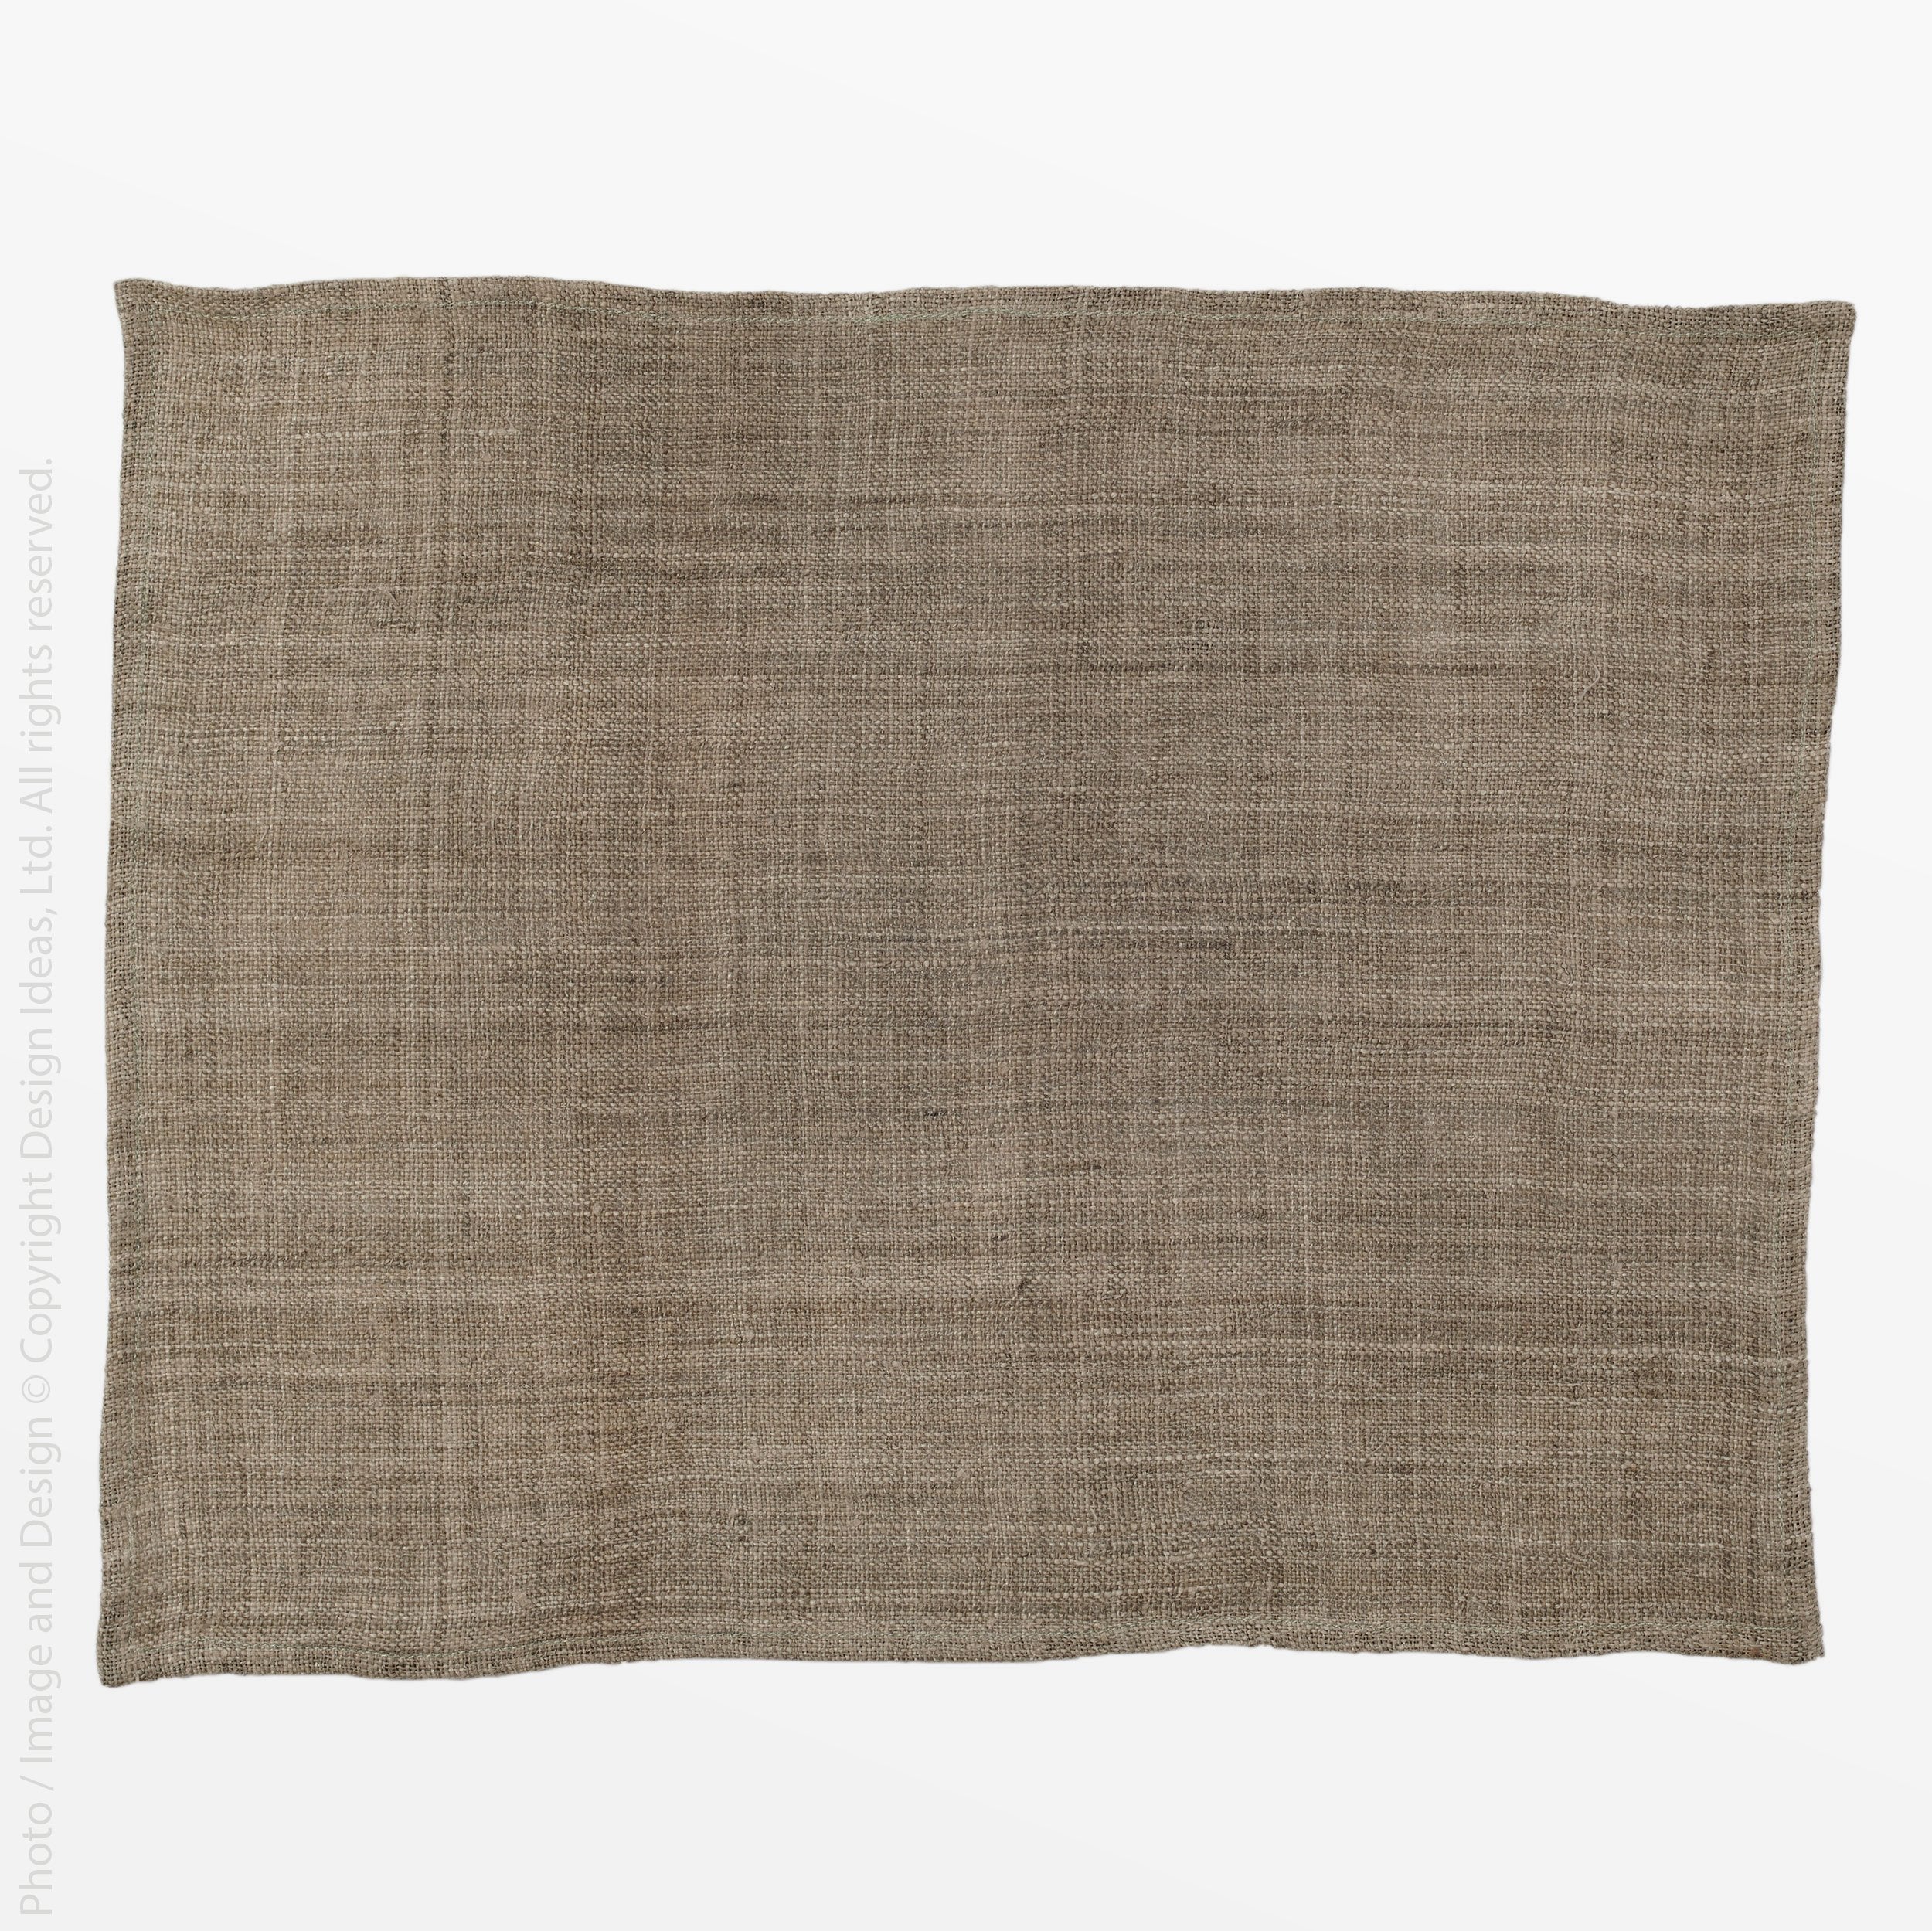 Marari Hemp Placemat - Sand Color | Image 3 | From the Marari Collection | Exquisitely created with natural hemp for long lasting use | This placemat is sustainably sourced | Available in natural, gray and bleached colors | texxture home